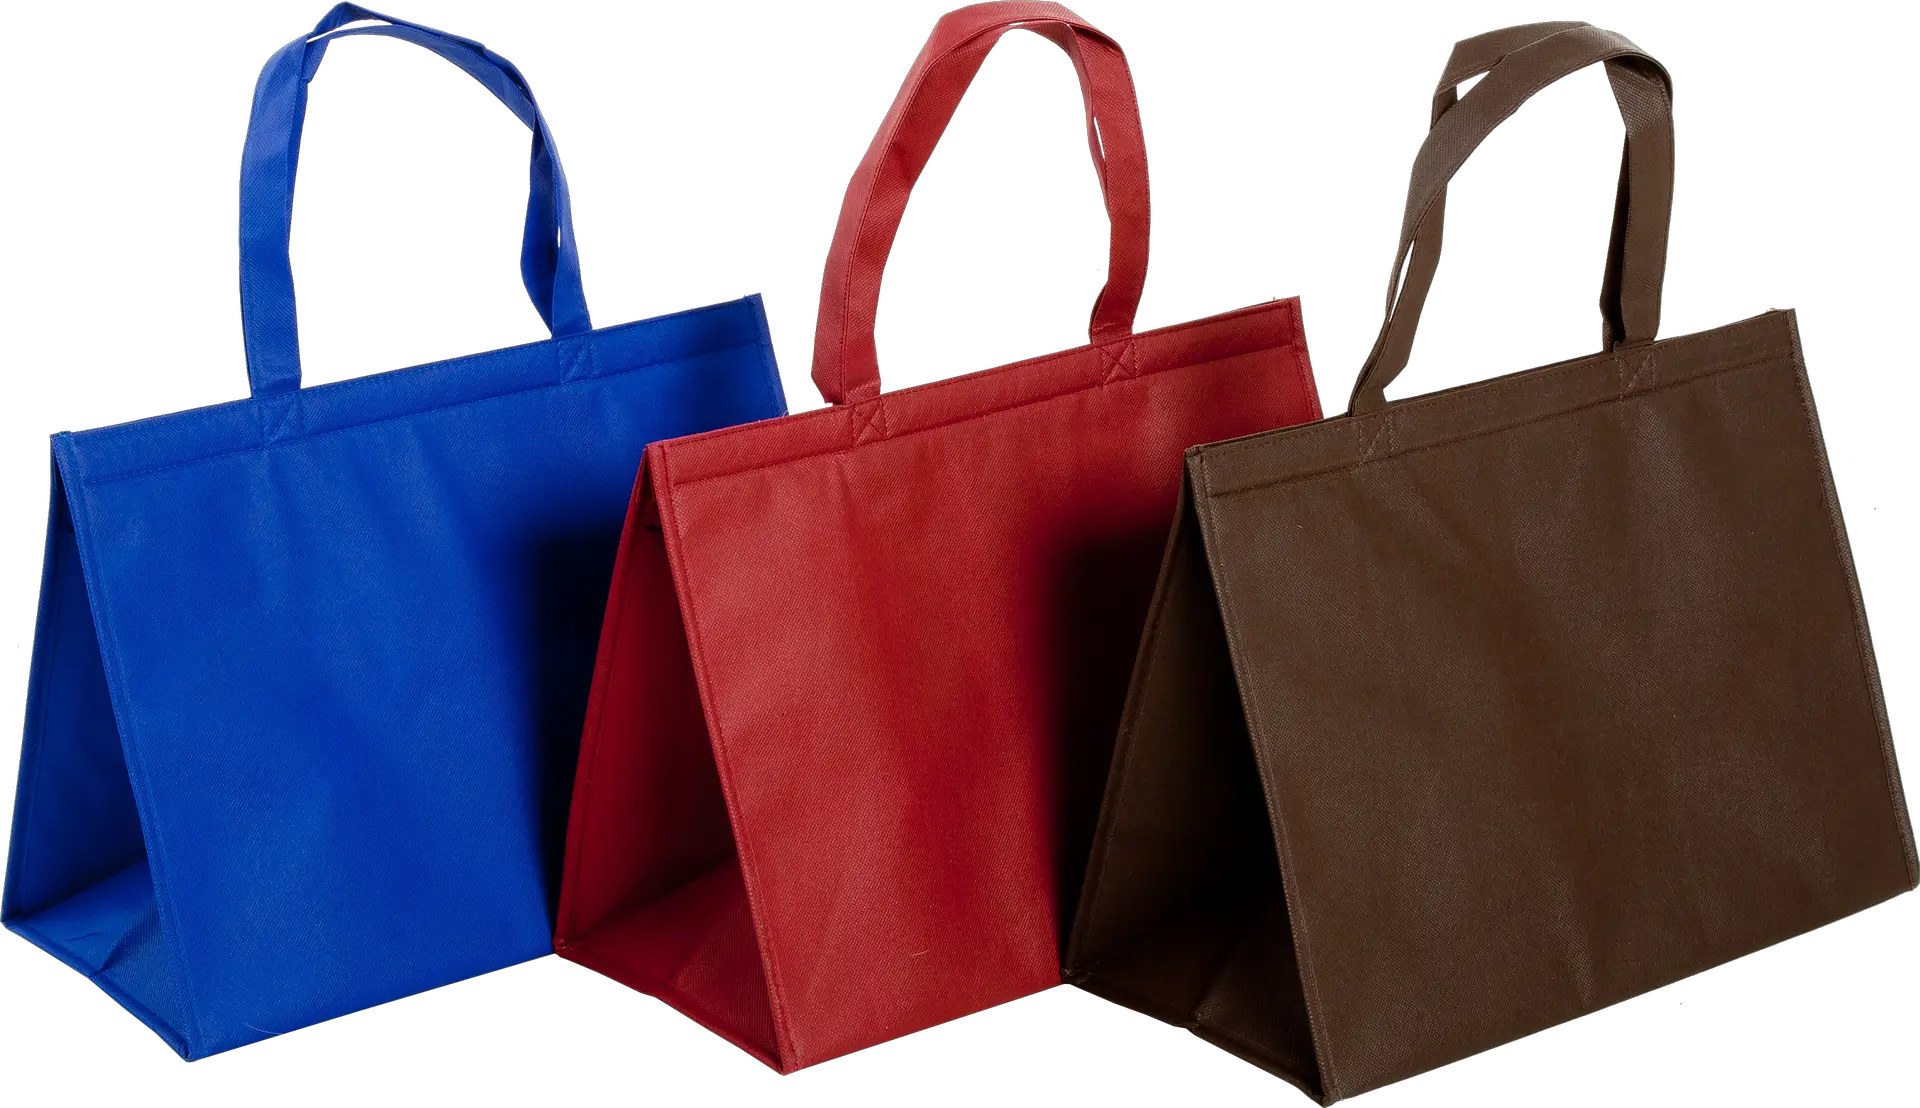 Are Non-Woven Bags Eco-Friendly? 11 Important Questions Answered